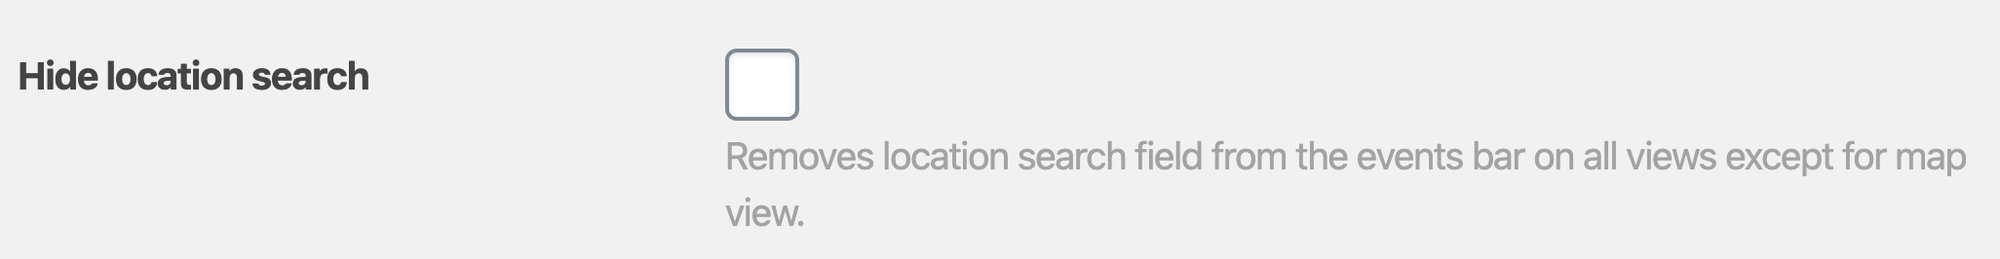 Screenshot of the Hide location search checkbox in the calendar settings.